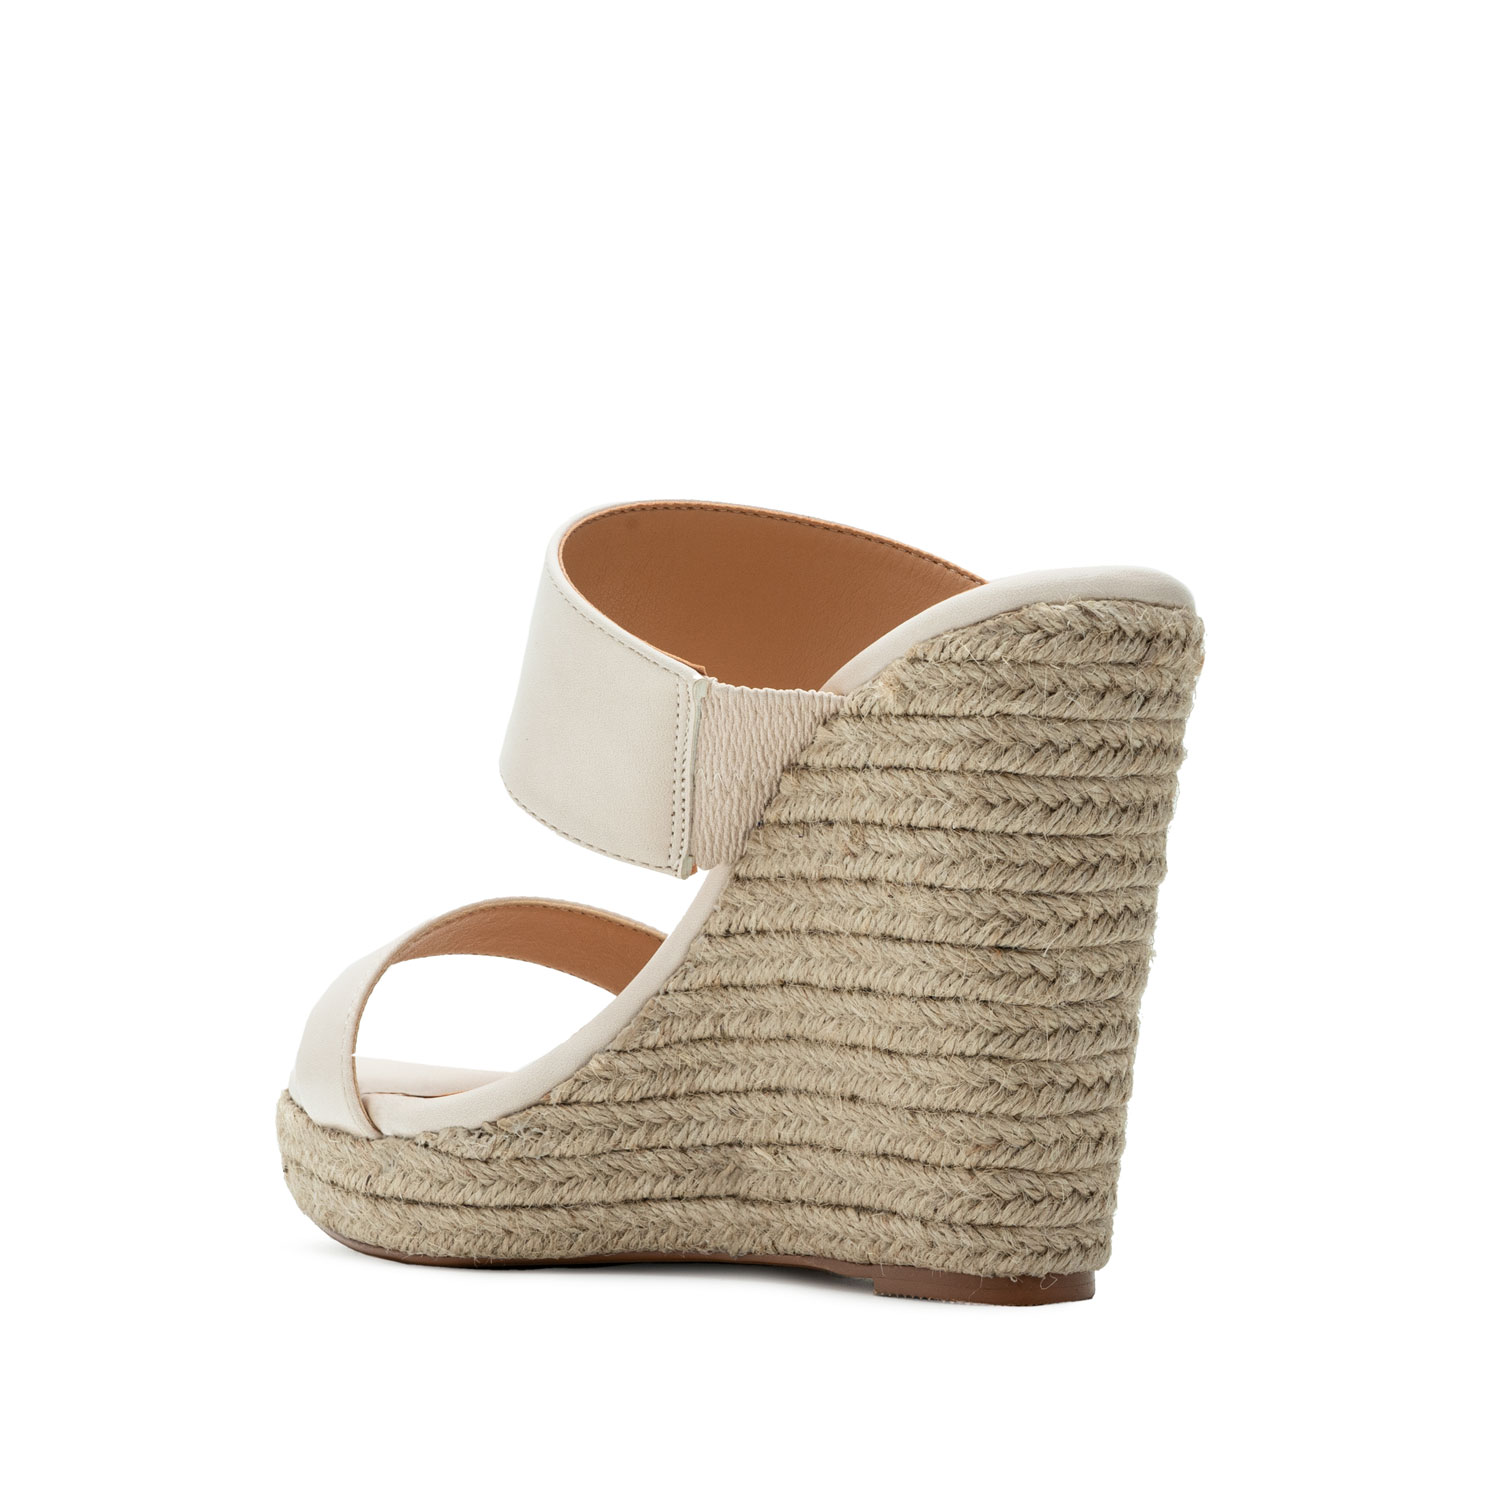 Jute Wedges in Cream-coloured faux Leather 